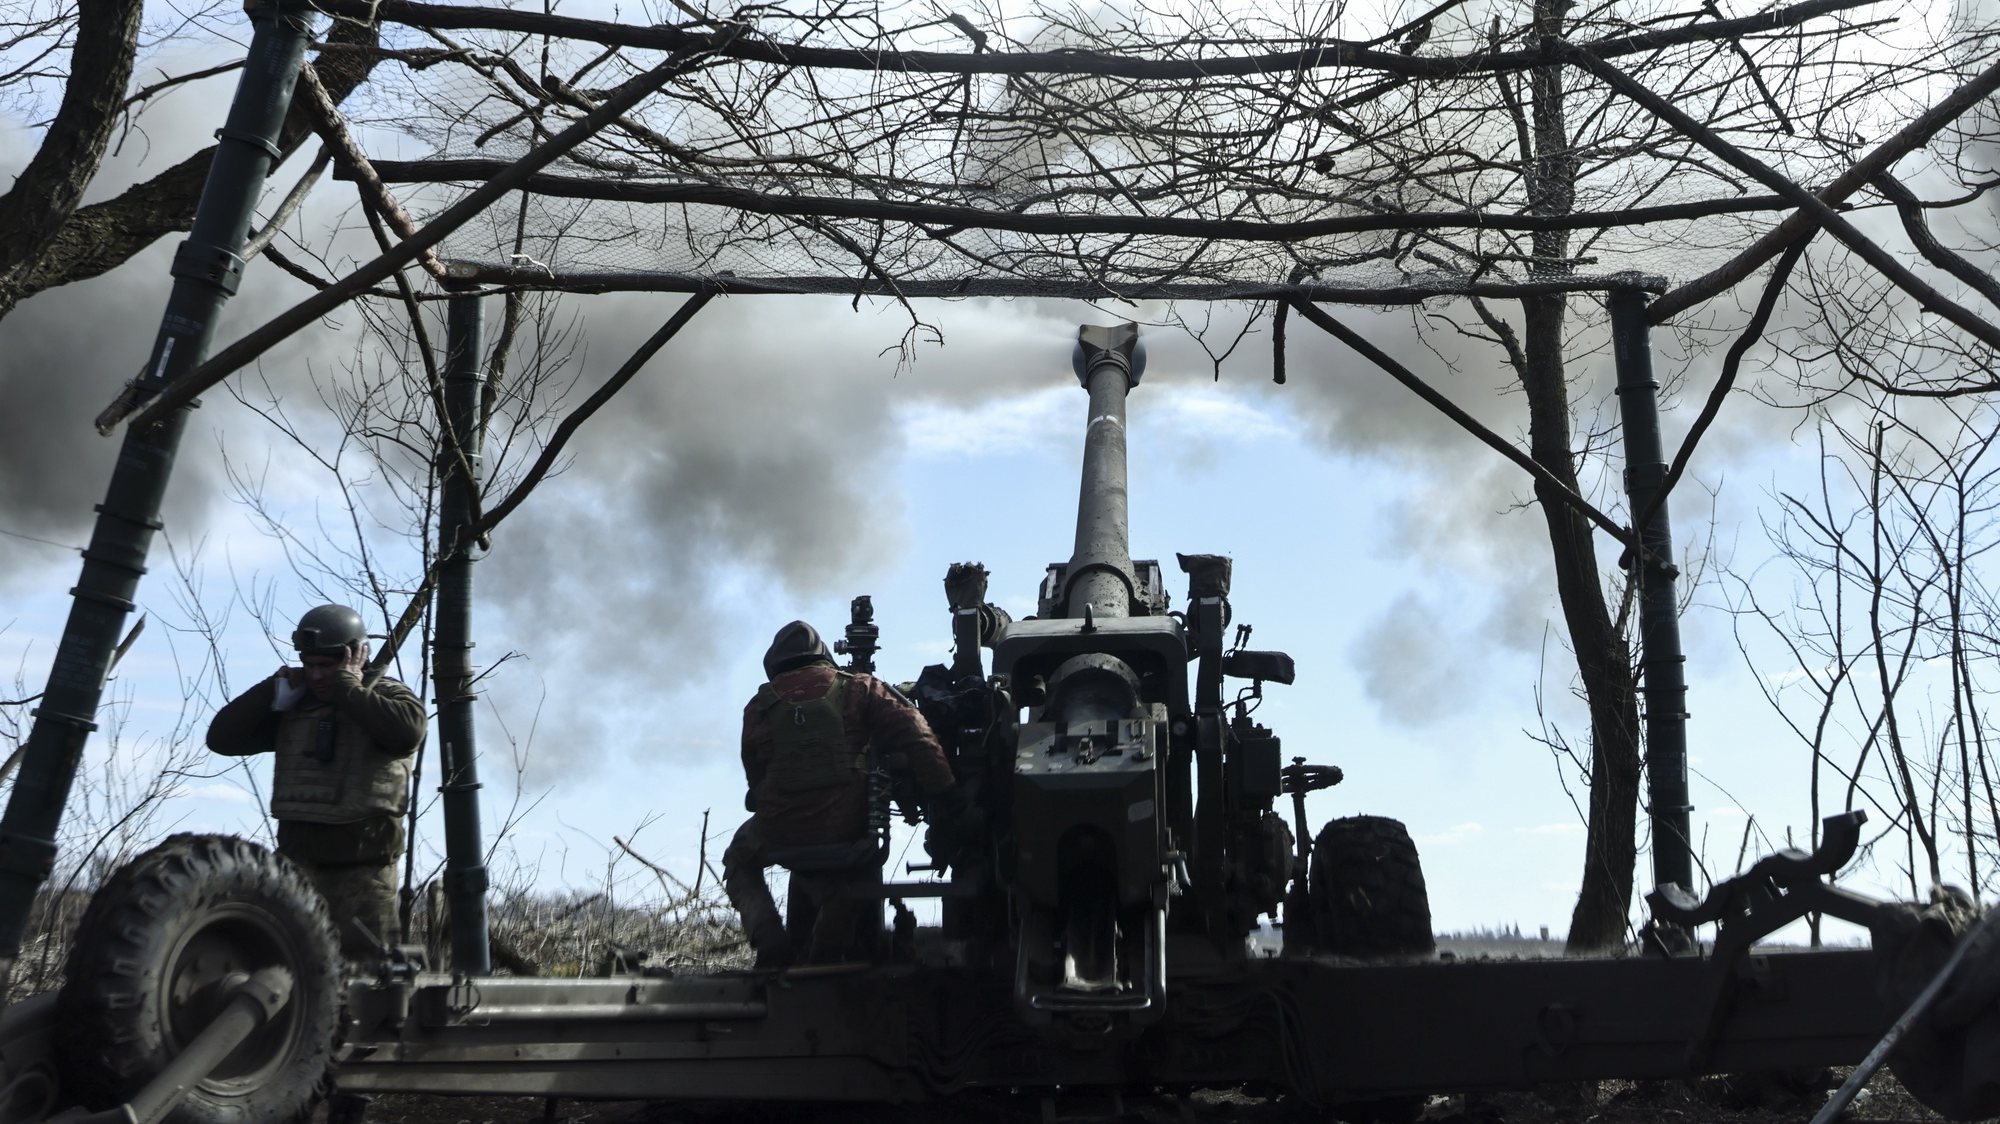 epa10500960 Ukrainian soldiers fire a FH70 howitzer from their position in the Zaporizhzhia area, Ukraine, 02 March 2023 (issued 03 March 2023) Russian troops entered Ukrainian territory on 24 February 2022, starting a conflict that has provoked destruction and a humanitarian crisis.  EPA/STR